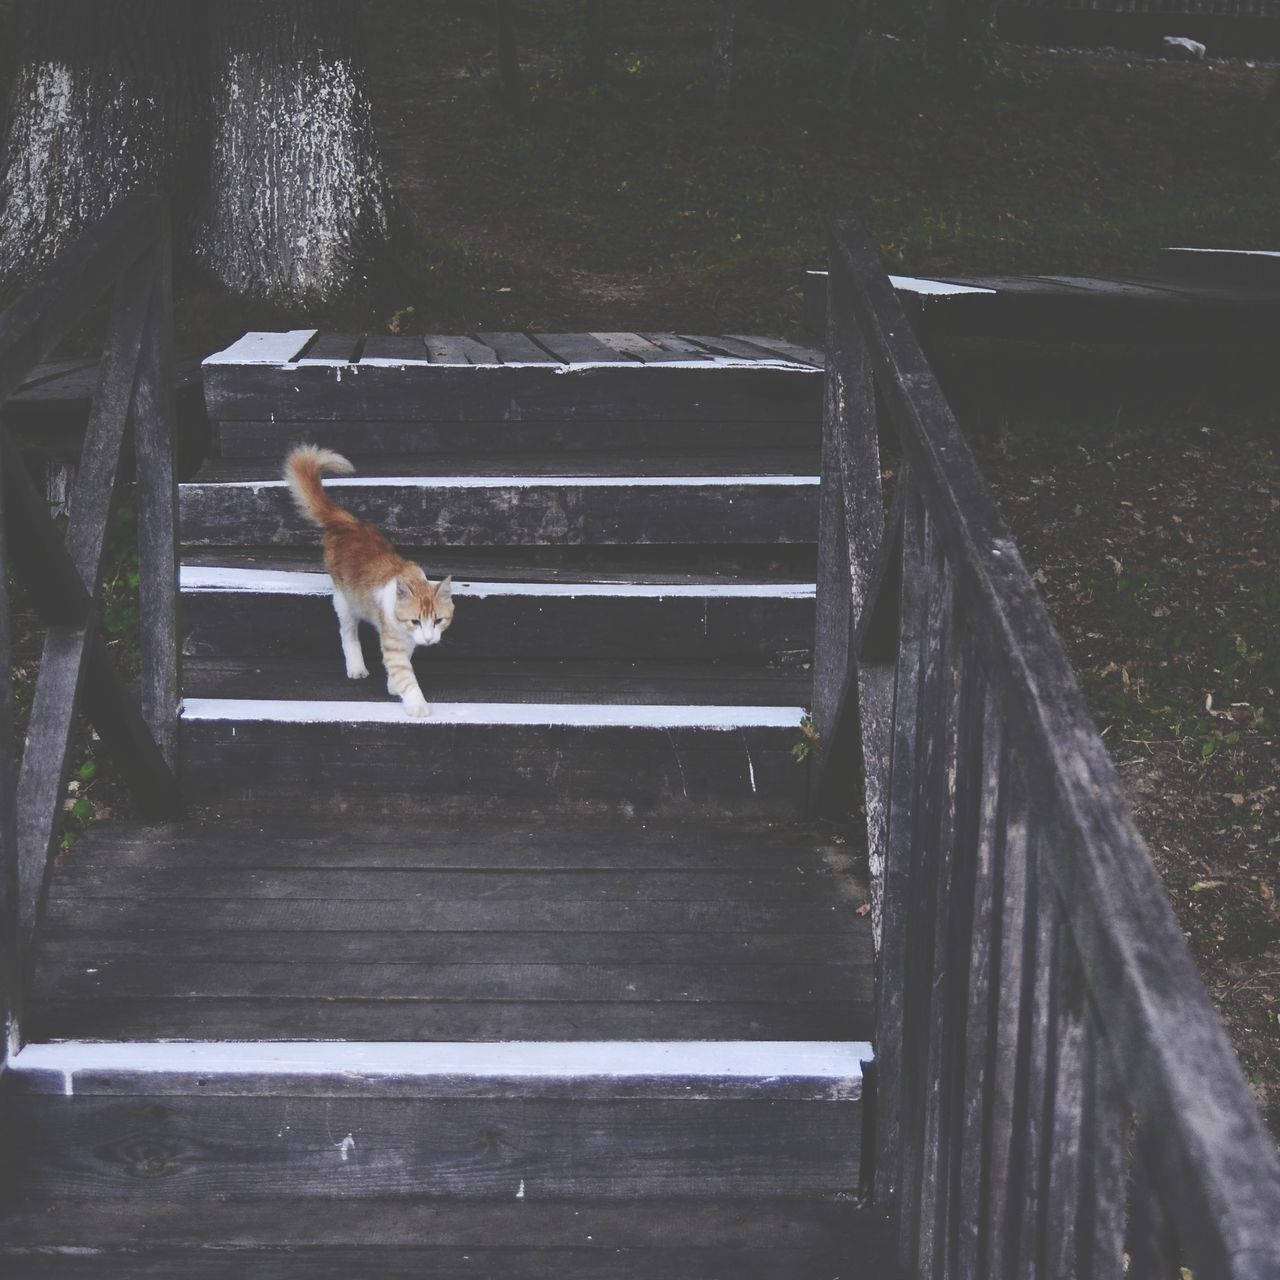 mammal, domestic, one animal, animal themes, domestic animals, pets, animal, vertebrate, wood - material, canine, dog, staircase, no people, full length, day, railing, architecture, nature, bench, outdoors